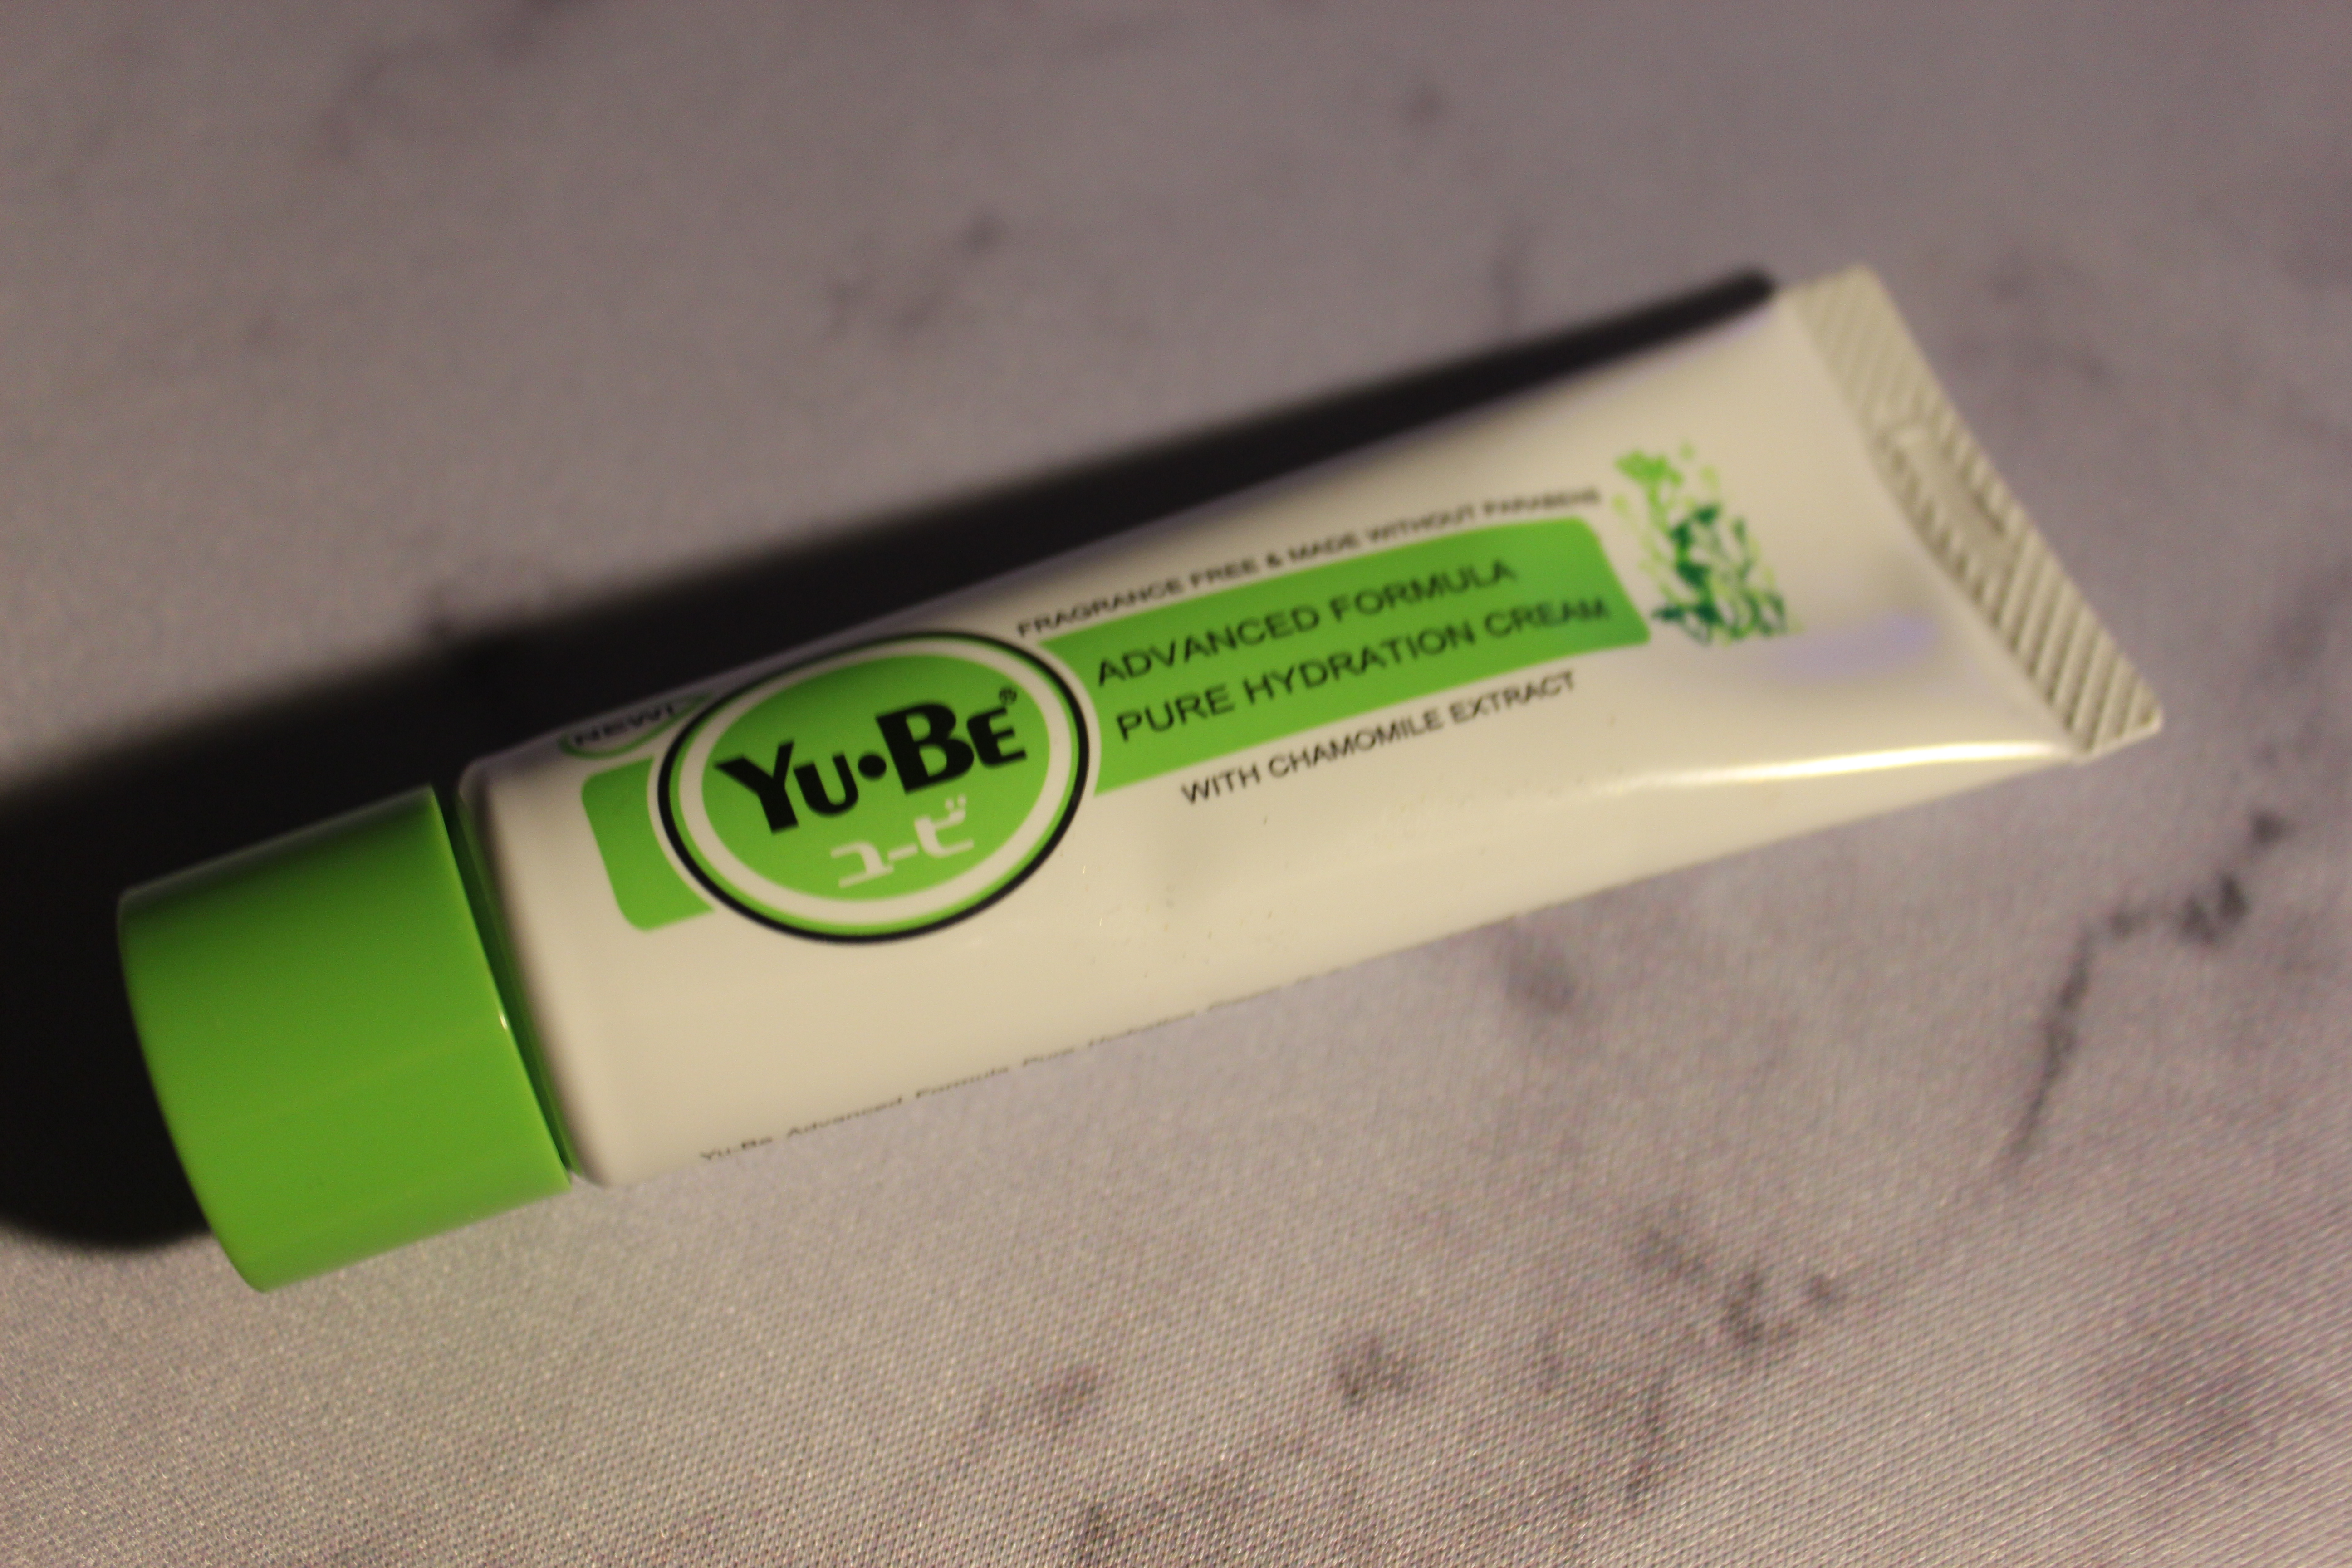 Yu-Be Advanced Formula Pure Hydration Cream with Chamomile Extract